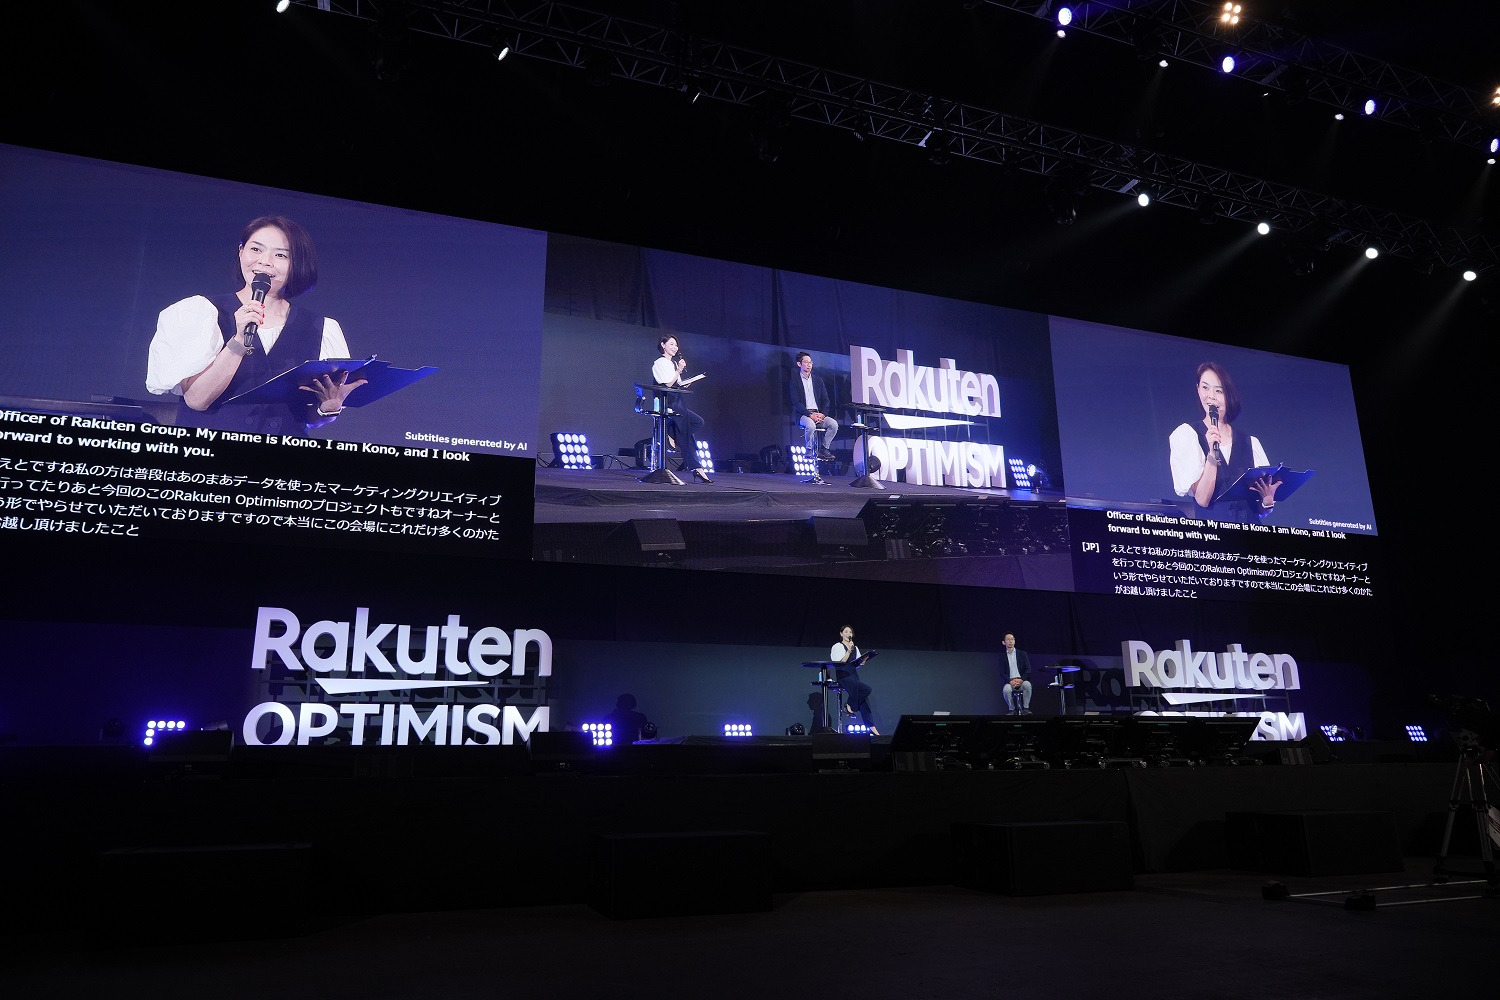 At the recent Rakuten Optimism conference, one topic made its way into almost every discussion: the meteoric rise of artificial intelligence.